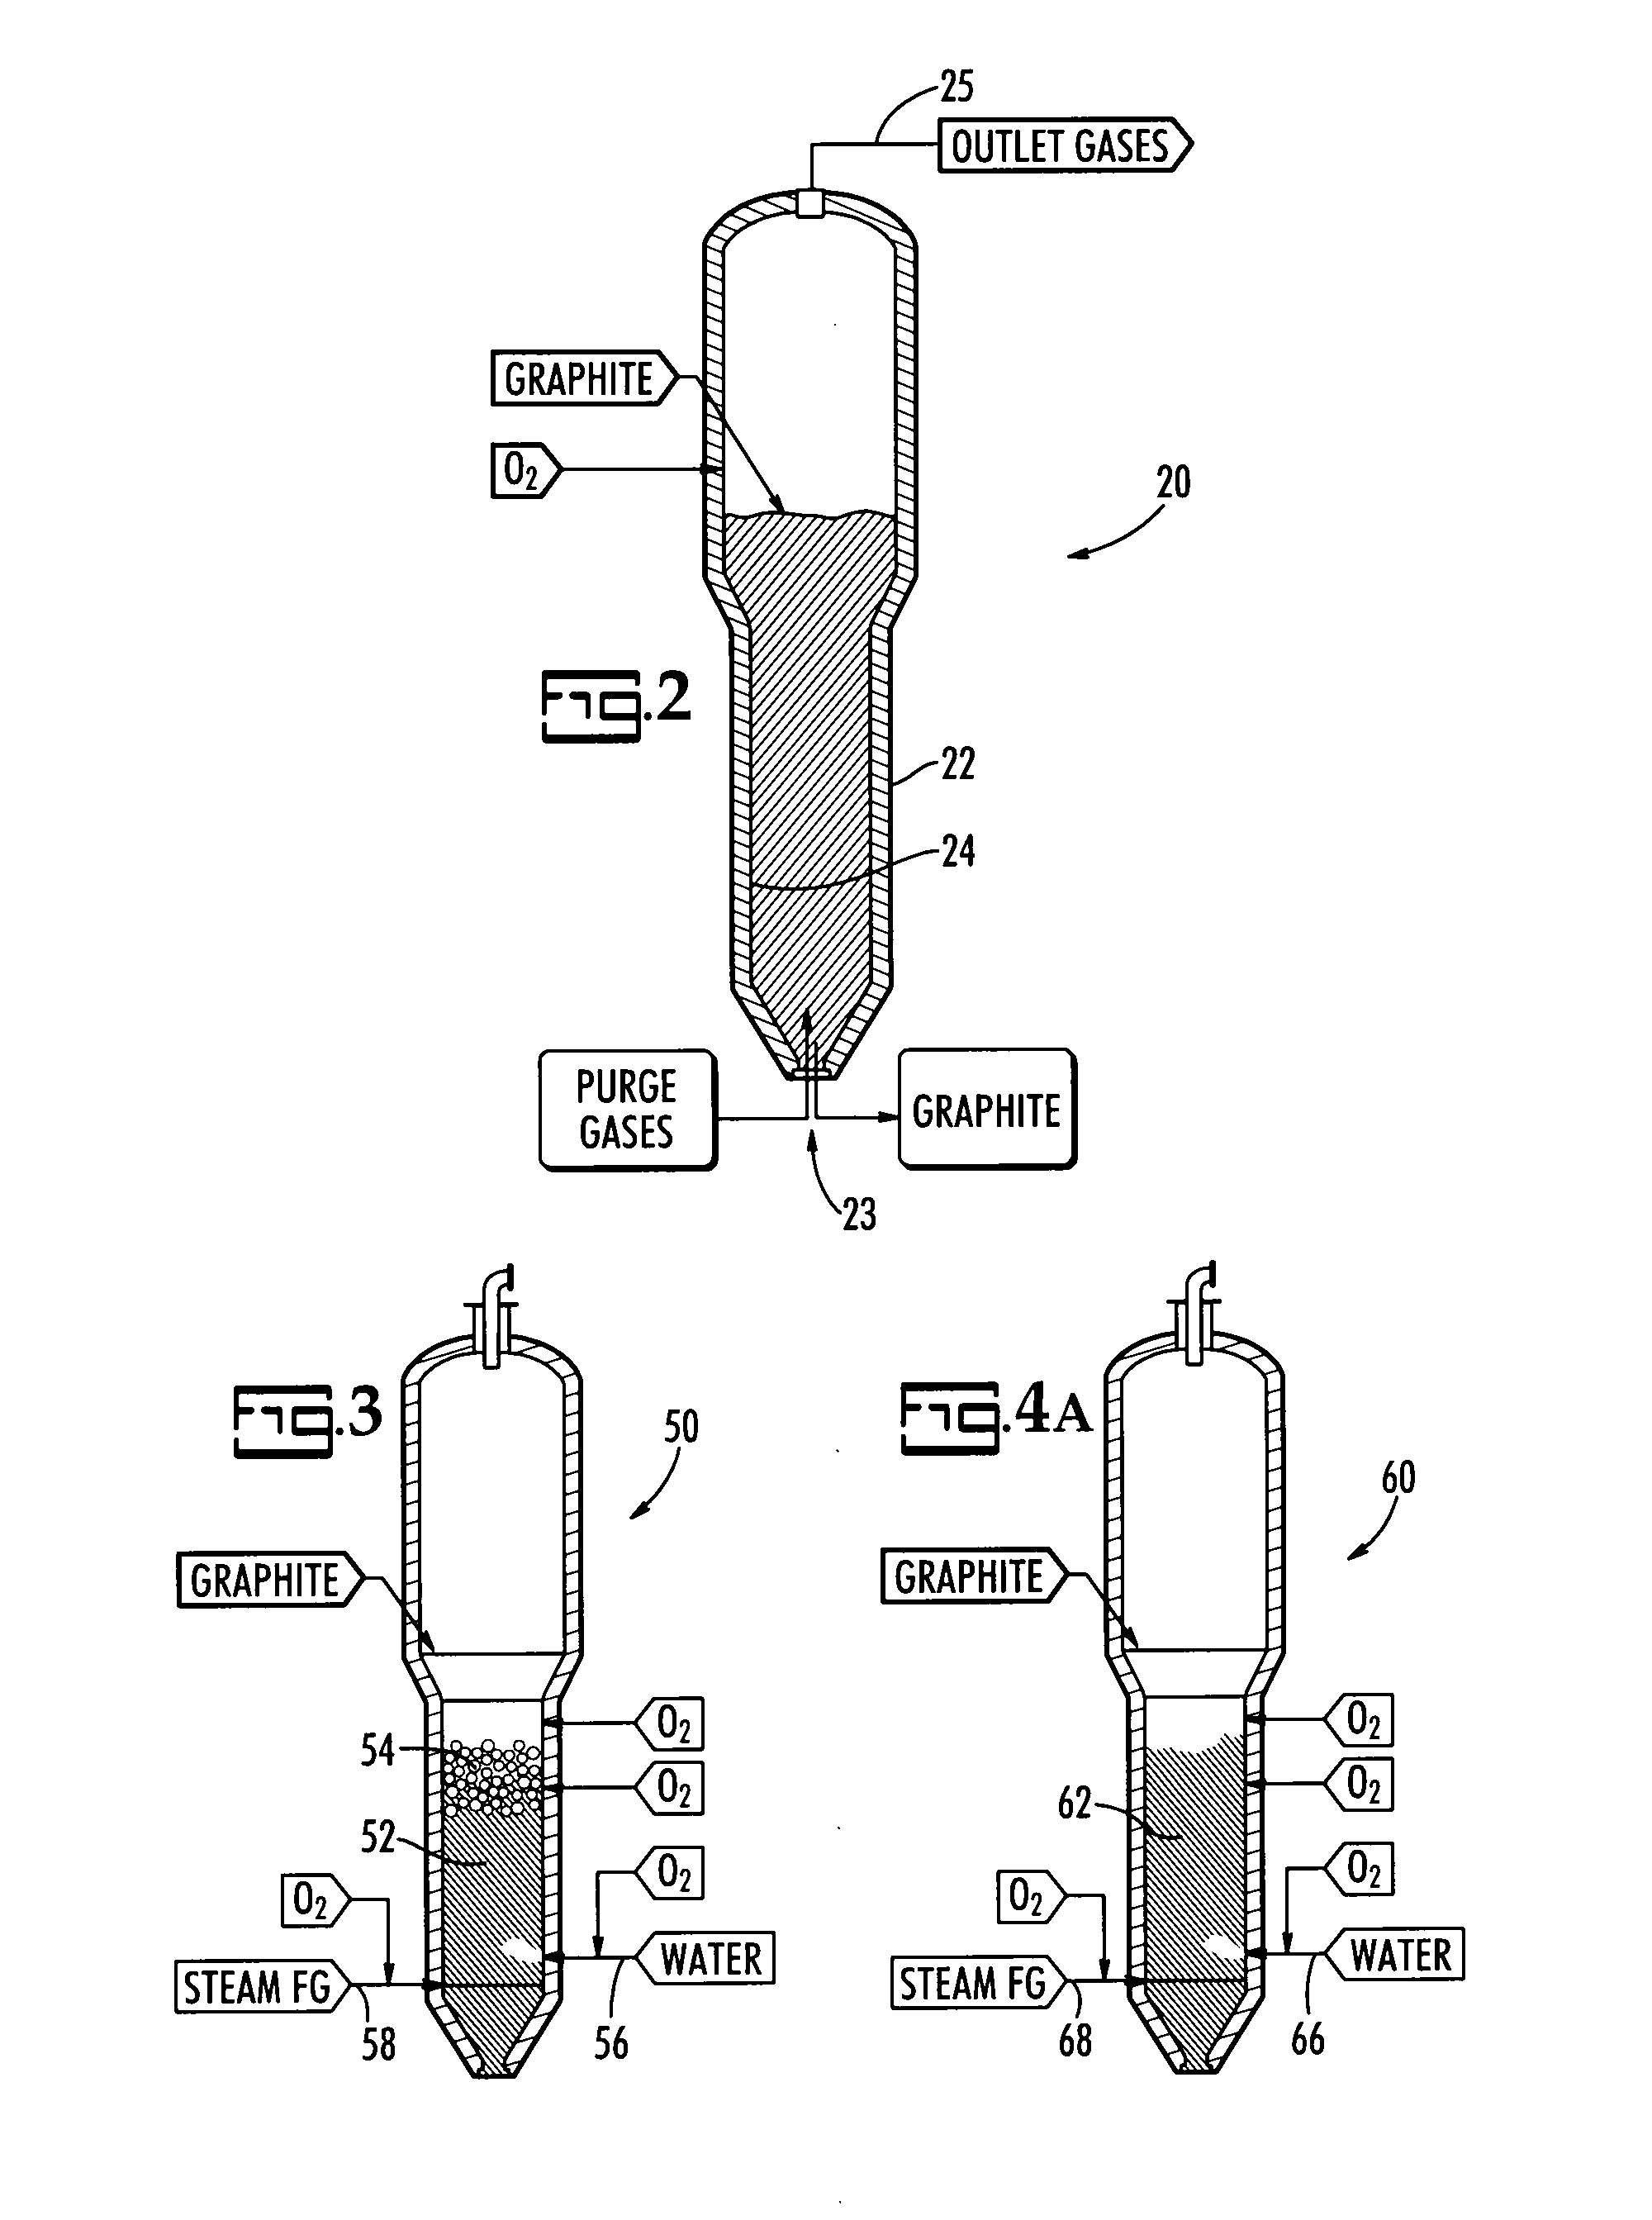 Steam reforming process system for graphite destruction and capture of radionuclides